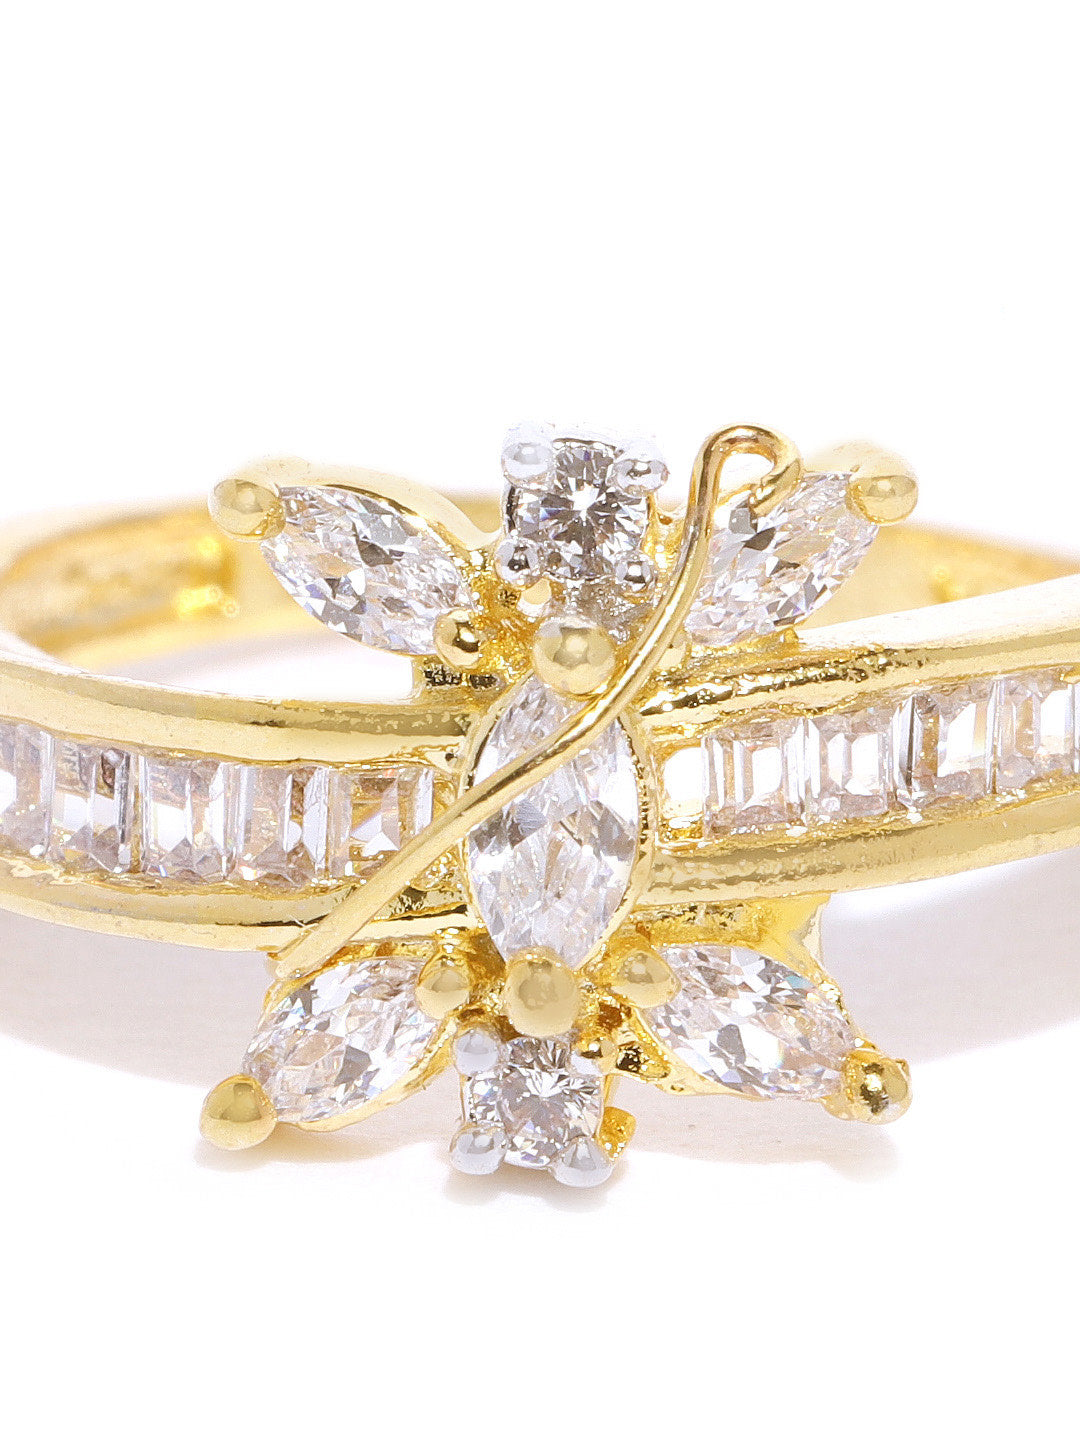 Gold-Plated American Diamond Studded Floral Patterned Ring